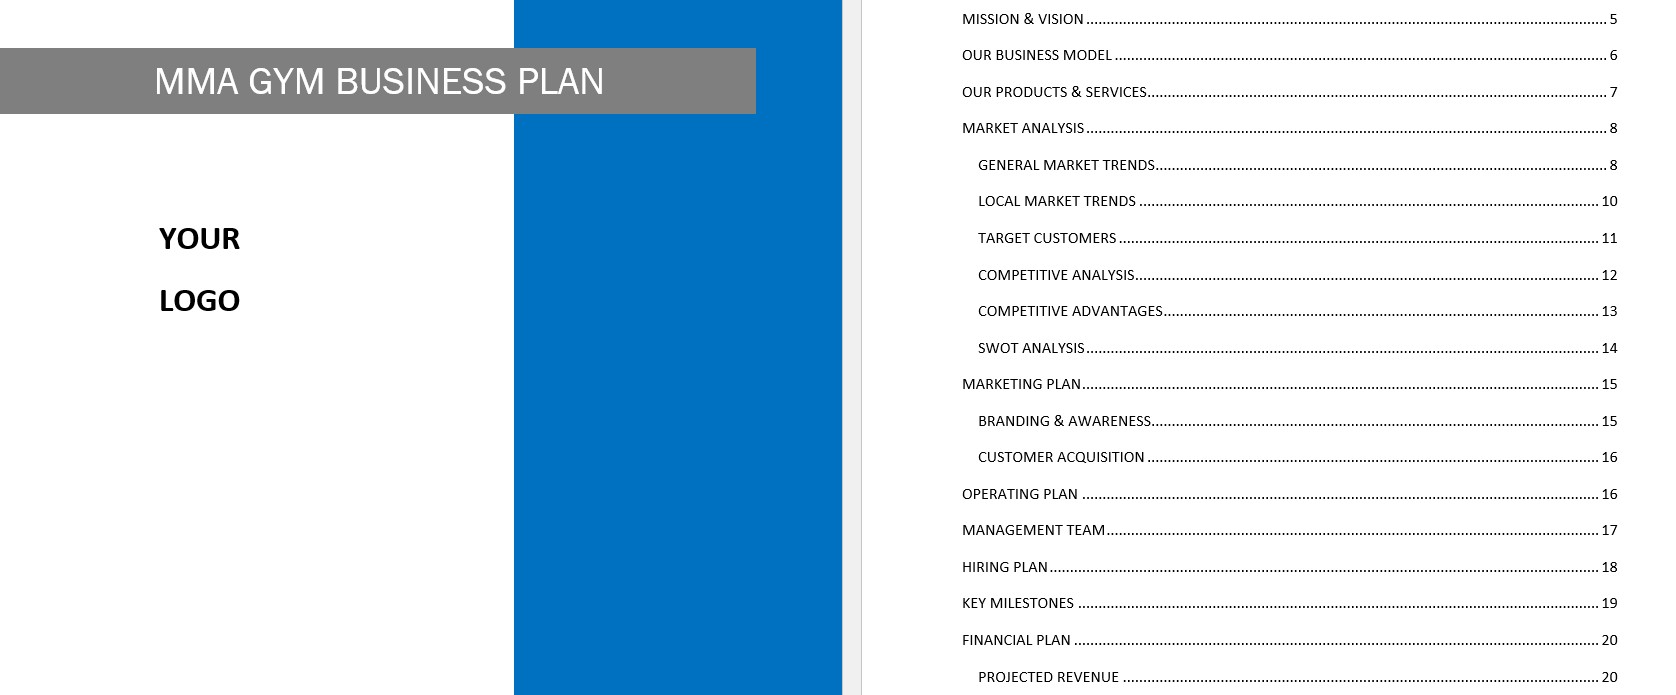 MMA gym business plan template in Word